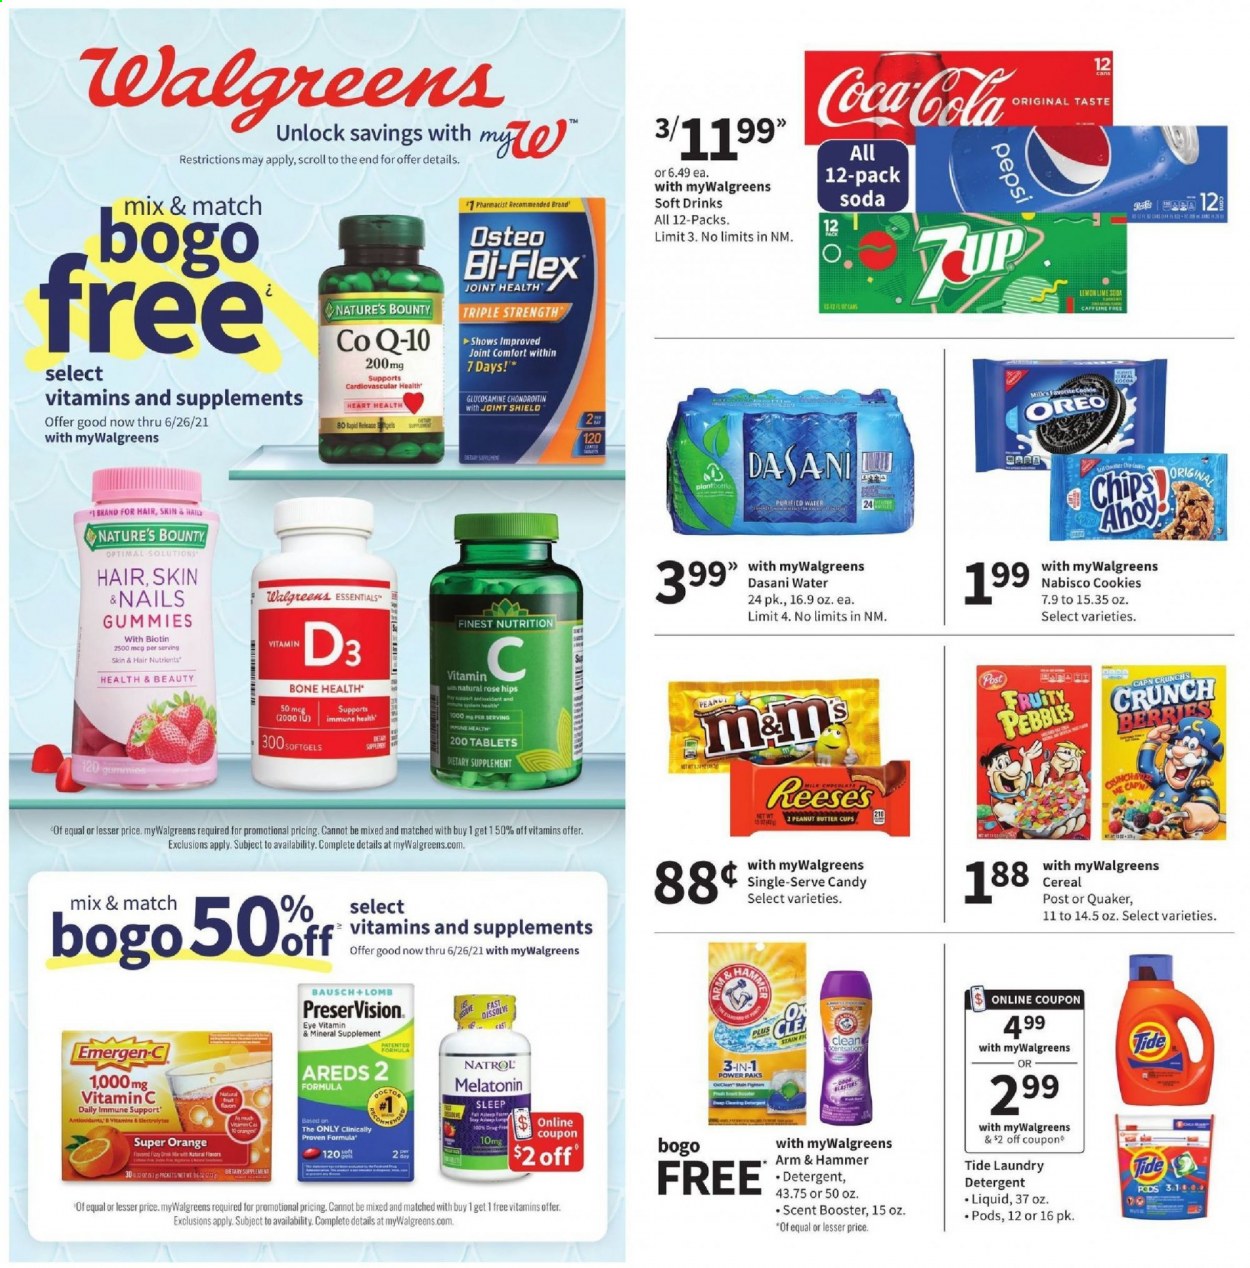 thumbnail - Walgreens Flyer - 06/20/2021 - 06/26/2021 - Sales products - Quaker, milk, Oreo, Reese's, cookies, 7 Days, peanut butter cups, chips, ARM & HAMMER, cocoa, cereals, Fruity Pebbles, Coca-Cola, Pepsi, soft drink, soda, purified water, wine, rosé wine, detergent, Tide, laundry detergent, Biotin, glucosamine, Natrol, Nature's Bounty, vitamin c, Bi-Flex, Emergen-C, vitamin D3, dietary supplement. Page 1.